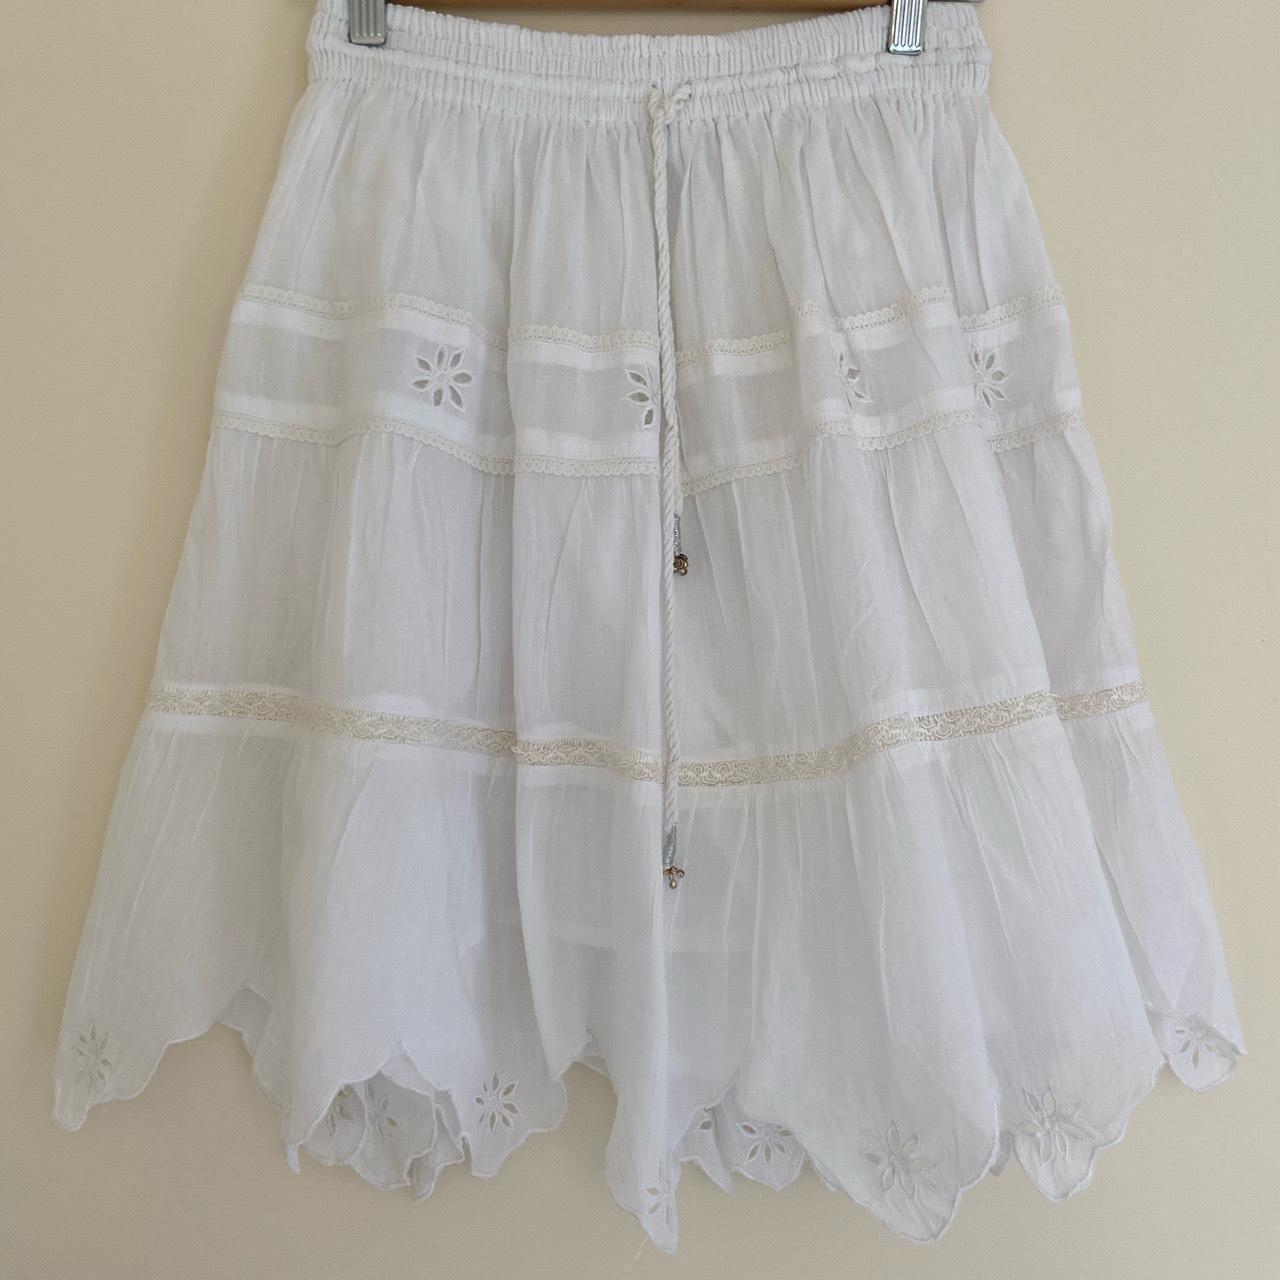 White Pixie Skirt White tiered skirt with beautiful... - Depop